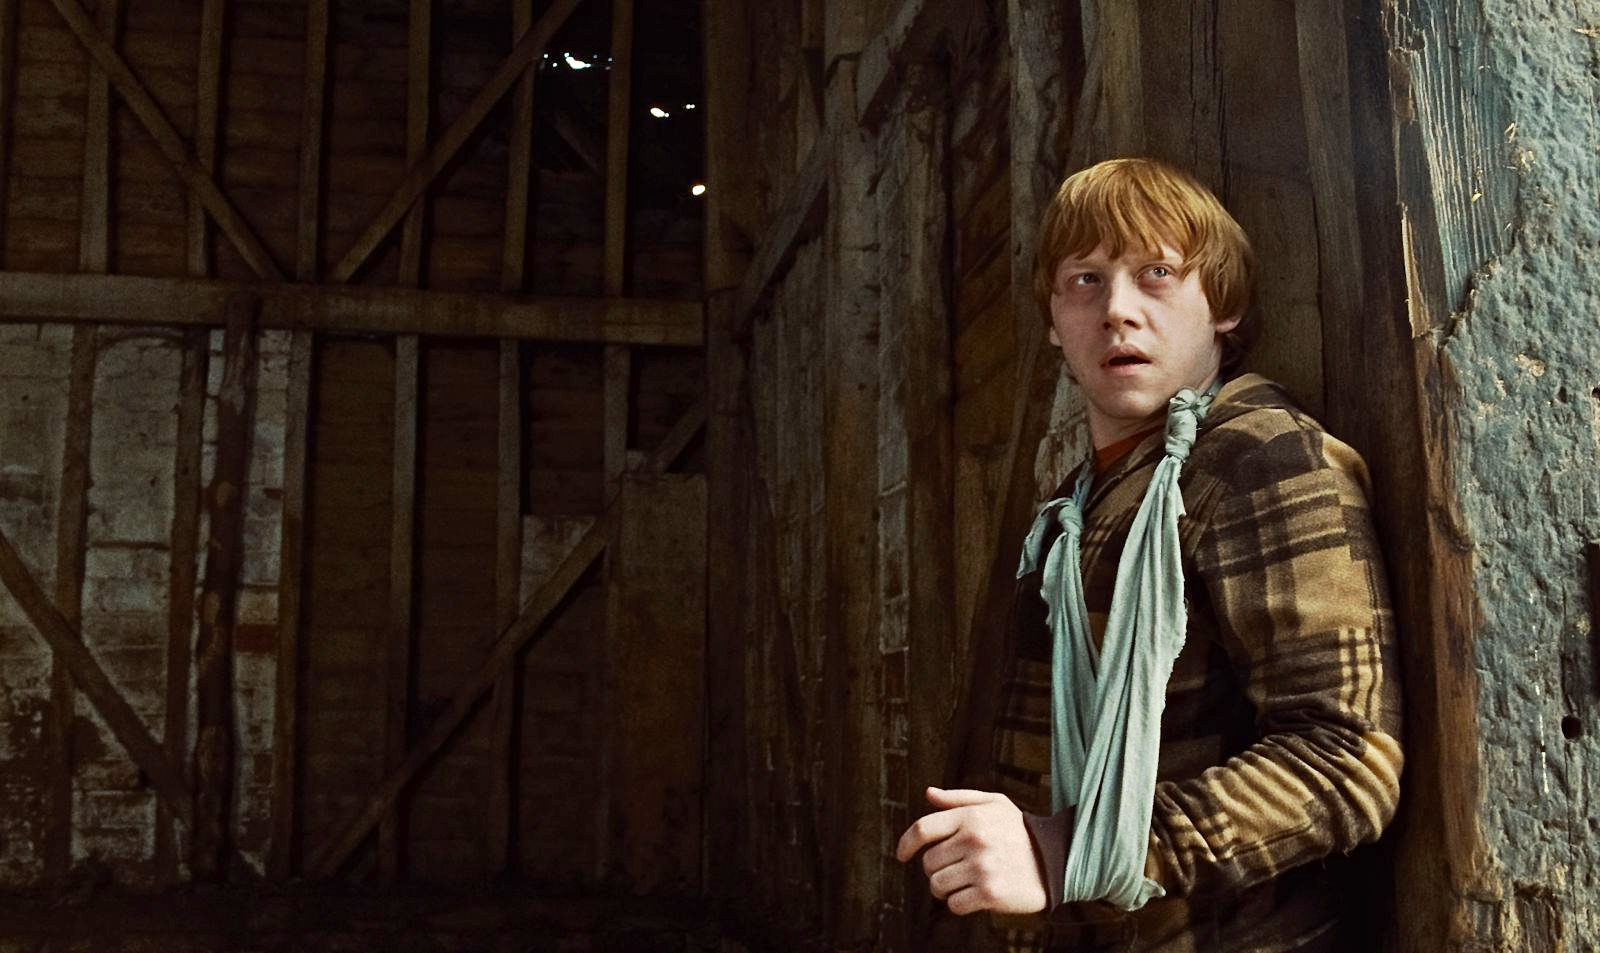 Rupert Grint stars as Ron Weasley in Warner Bros. Pictures' Harry Potter and the Deathly Hallows: Part I (2010)